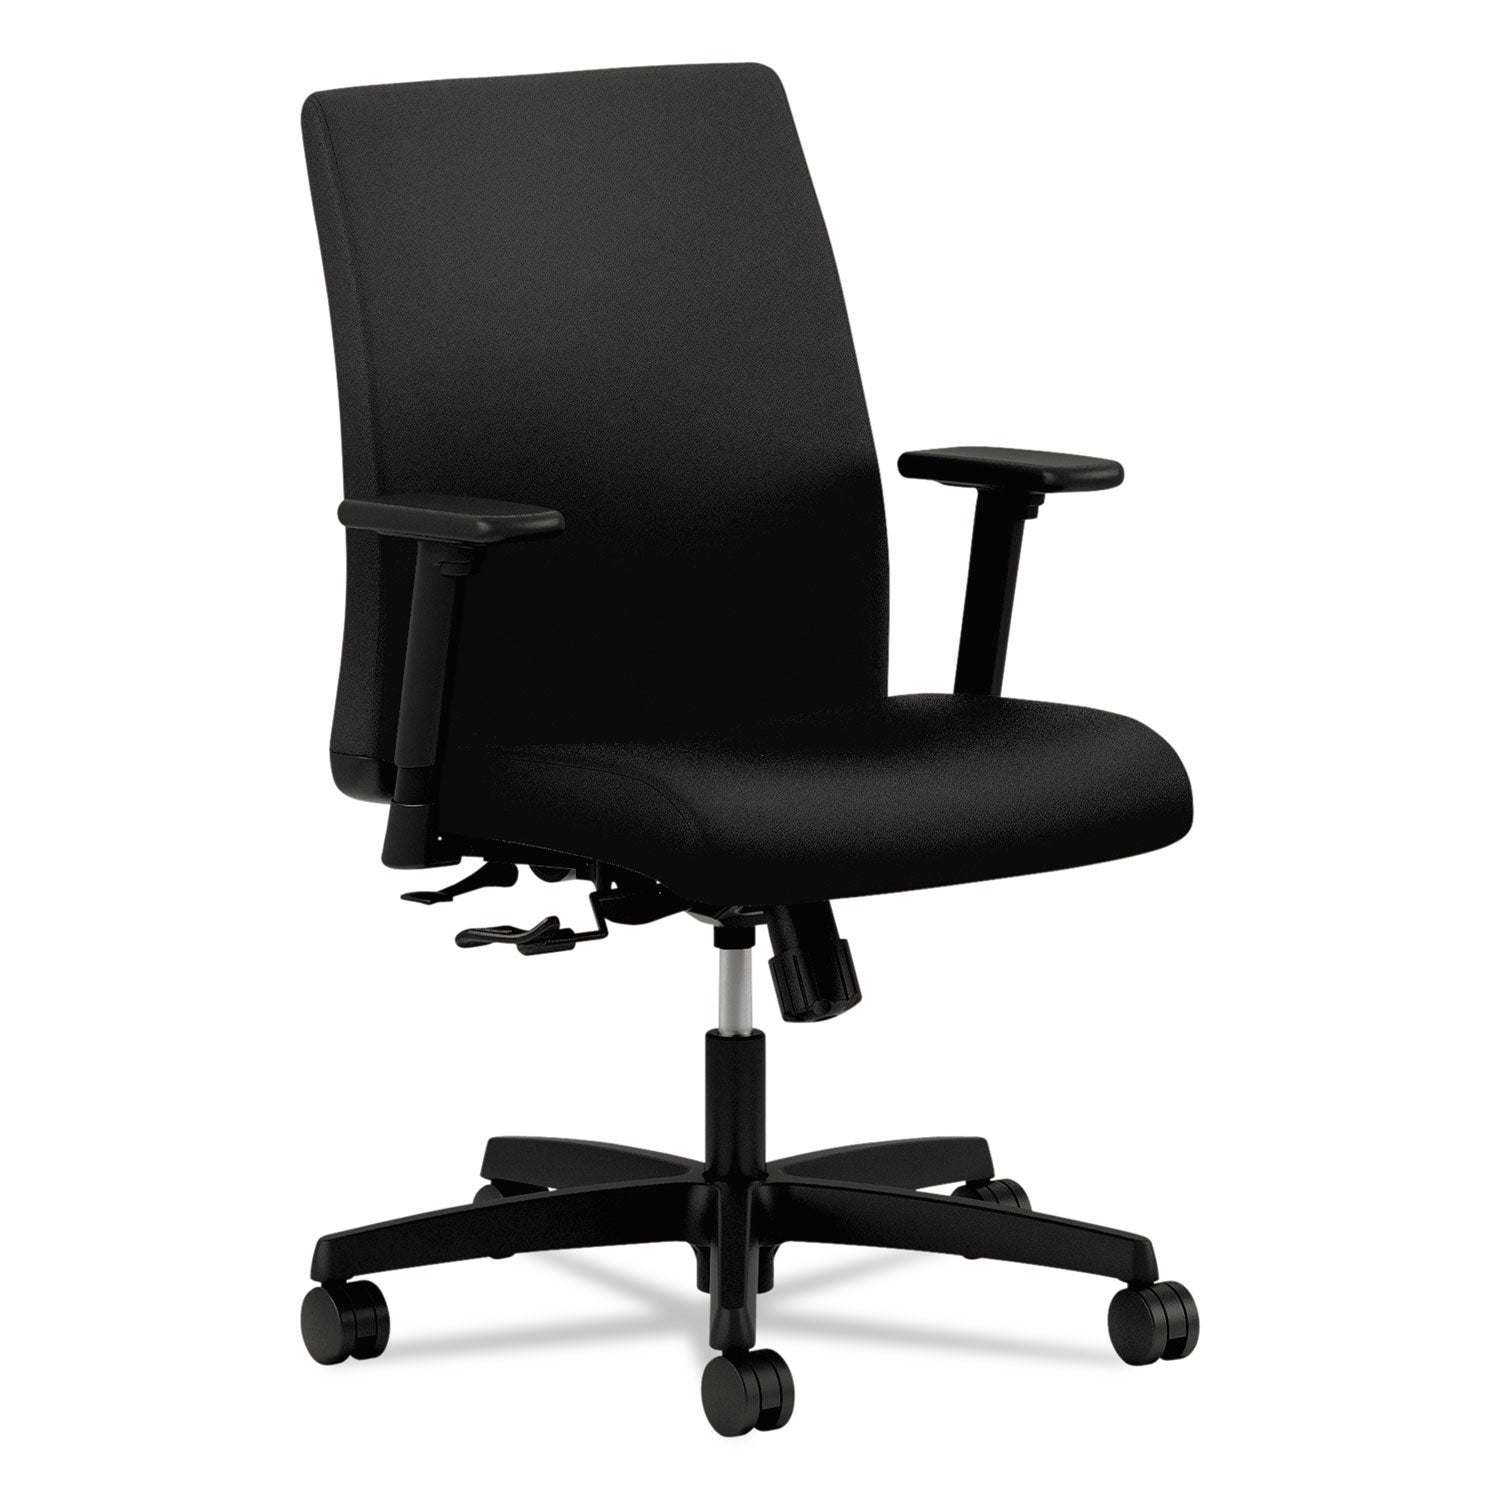 ignition-series-fabric-low-back-task-chair-supports-up-to-300-lb-17-to-215-seat-height-black_honit105cu10 - 1